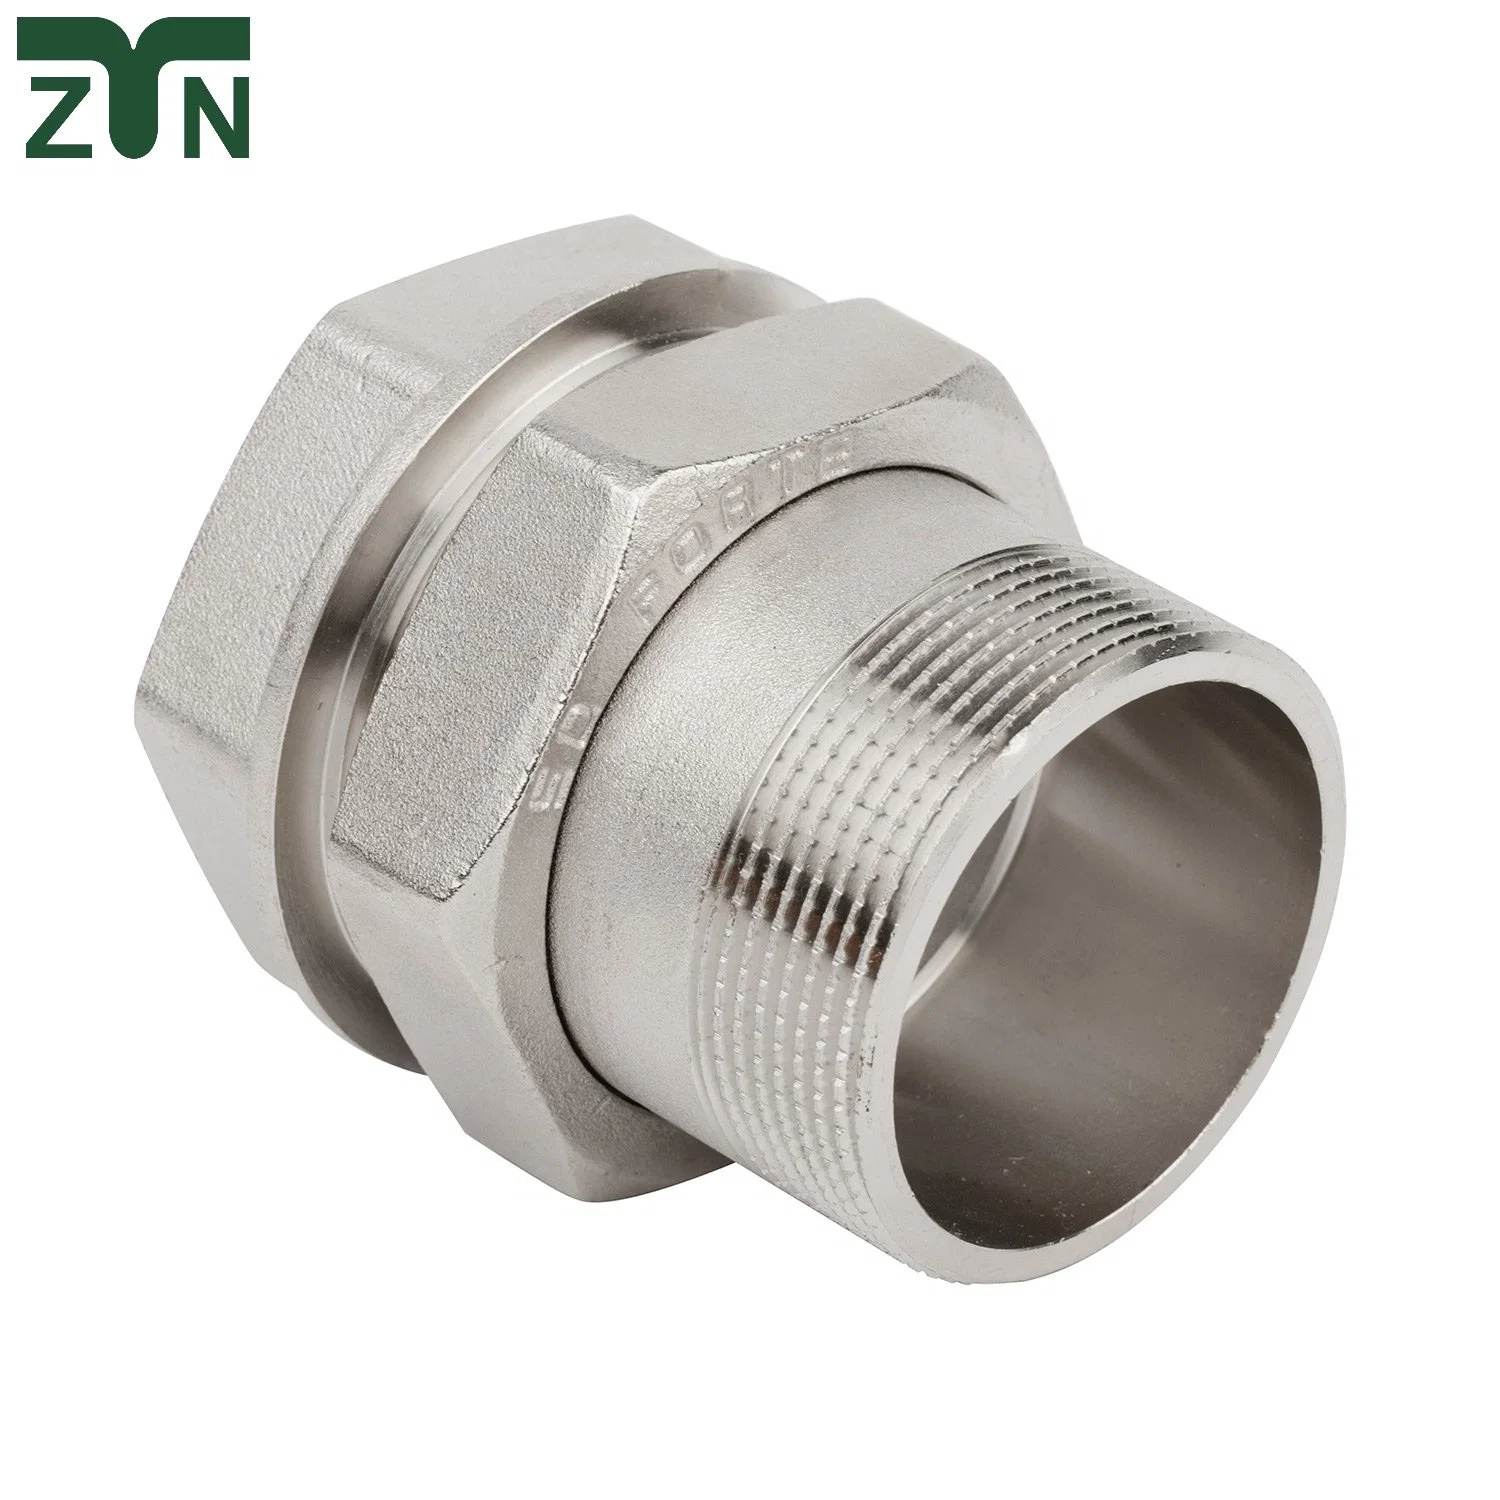 Full Range of Straight Couplings Pipe Fittings Compression Brass Fitting with High quality/High cost performance 